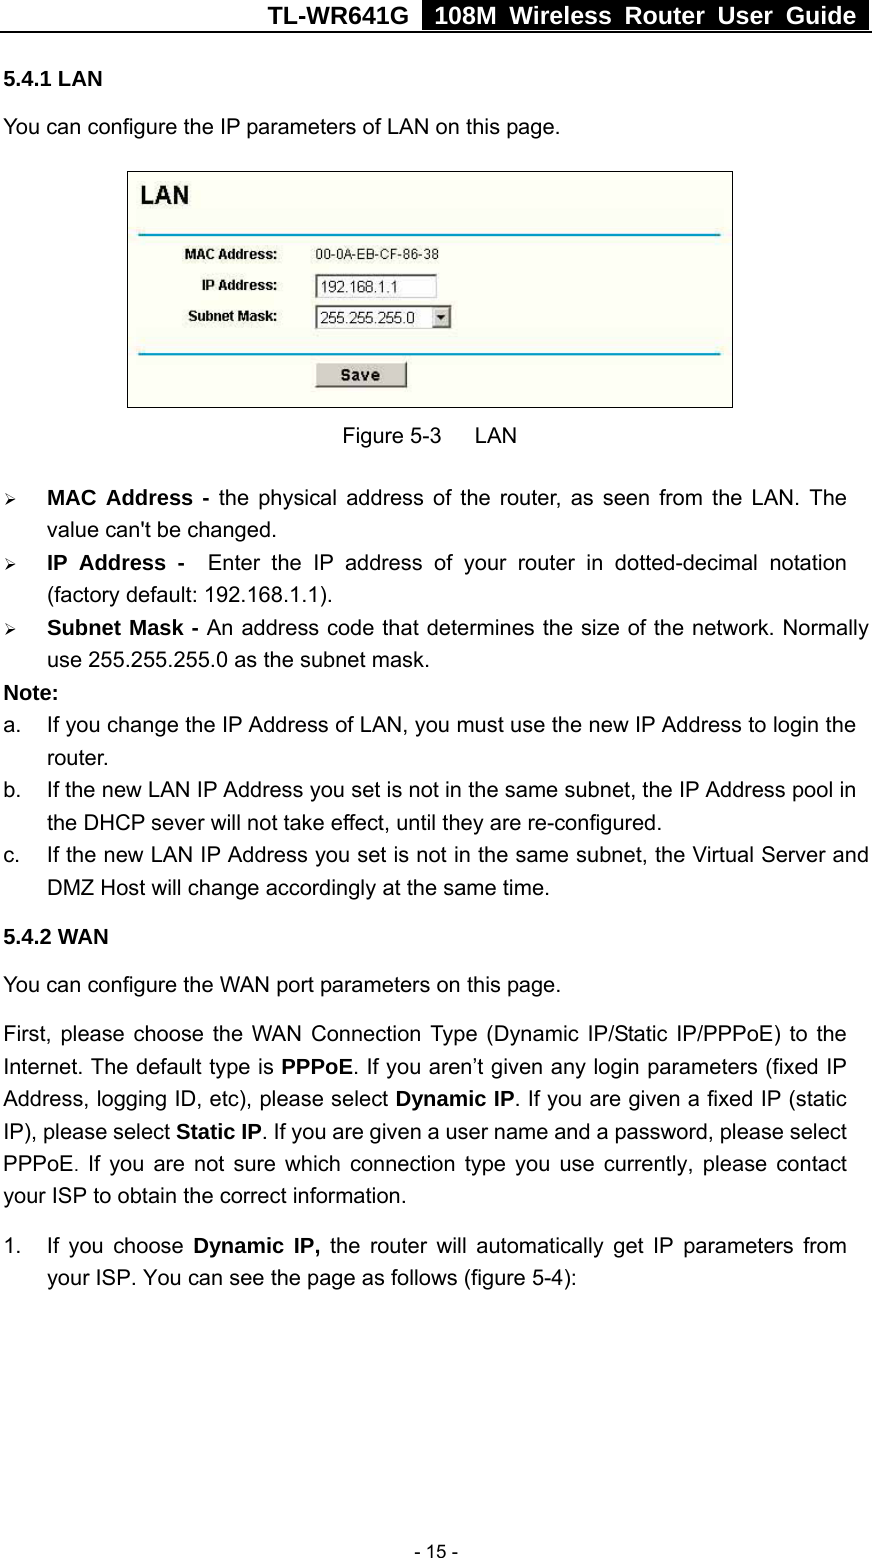 TL-WR641G   108M Wireless Router User Guide   - 15 -5.4.1 LAN You can configure the IP parameters of LAN on this page.    Figure 5-3   LAN ¾ MAC Address - the physical address of the router, as seen from the LAN. The value can&apos;t be changed. ¾ IP Address -  Enter the IP address of your router in dotted-decimal notation (factory default: 192.168.1.1). ¾ Subnet Mask - An address code that determines the size of the network. Normally use 255.255.255.0 as the subnet mask.   Note:  a.  If you change the IP Address of LAN, you must use the new IP Address to login the router.  b.  If the new LAN IP Address you set is not in the same subnet, the IP Address pool in the DHCP sever will not take effect, until they are re-configured. c.  If the new LAN IP Address you set is not in the same subnet, the Virtual Server and DMZ Host will change accordingly at the same time. 5.4.2 WAN You can configure the WAN port parameters on this page. First, please choose the WAN Connection Type (Dynamic IP/Static IP/PPPoE) to the Internet. The default type is PPPoE. If you aren’t given any login parameters (fixed IP Address, logging ID, etc), please select Dynamic IP. If you are given a fixed IP (static IP), please select Static IP. If you are given a user name and a password, please select PPPoE. If you are not sure which connection type you use currently, please contact your ISP to obtain the correct information. 1. If you choose Dynamic IP, the router will automatically get IP parameters from your ISP. You can see the page as follows (figure 5-4): 